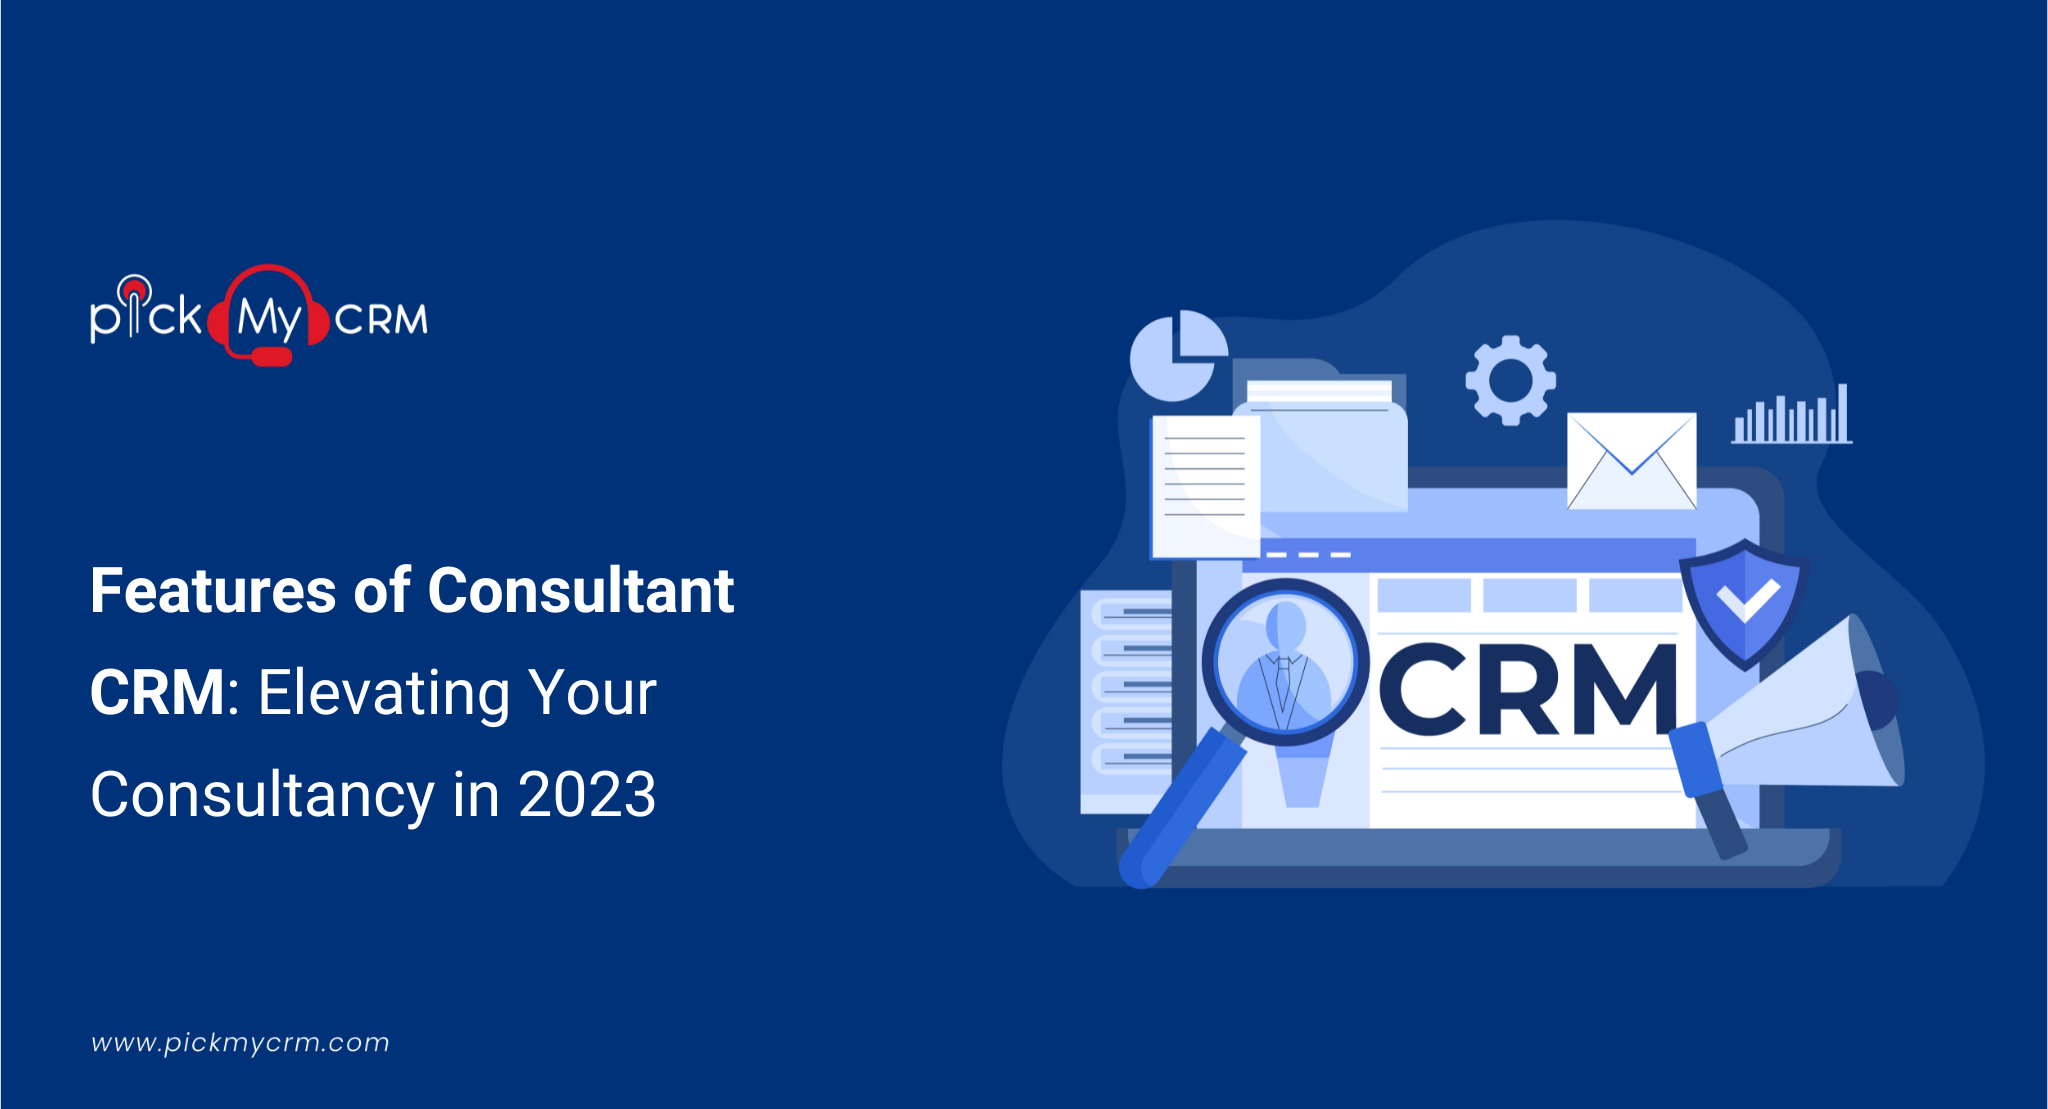 Features of Consultant CRM: Elevating Your Consultancy in 2023